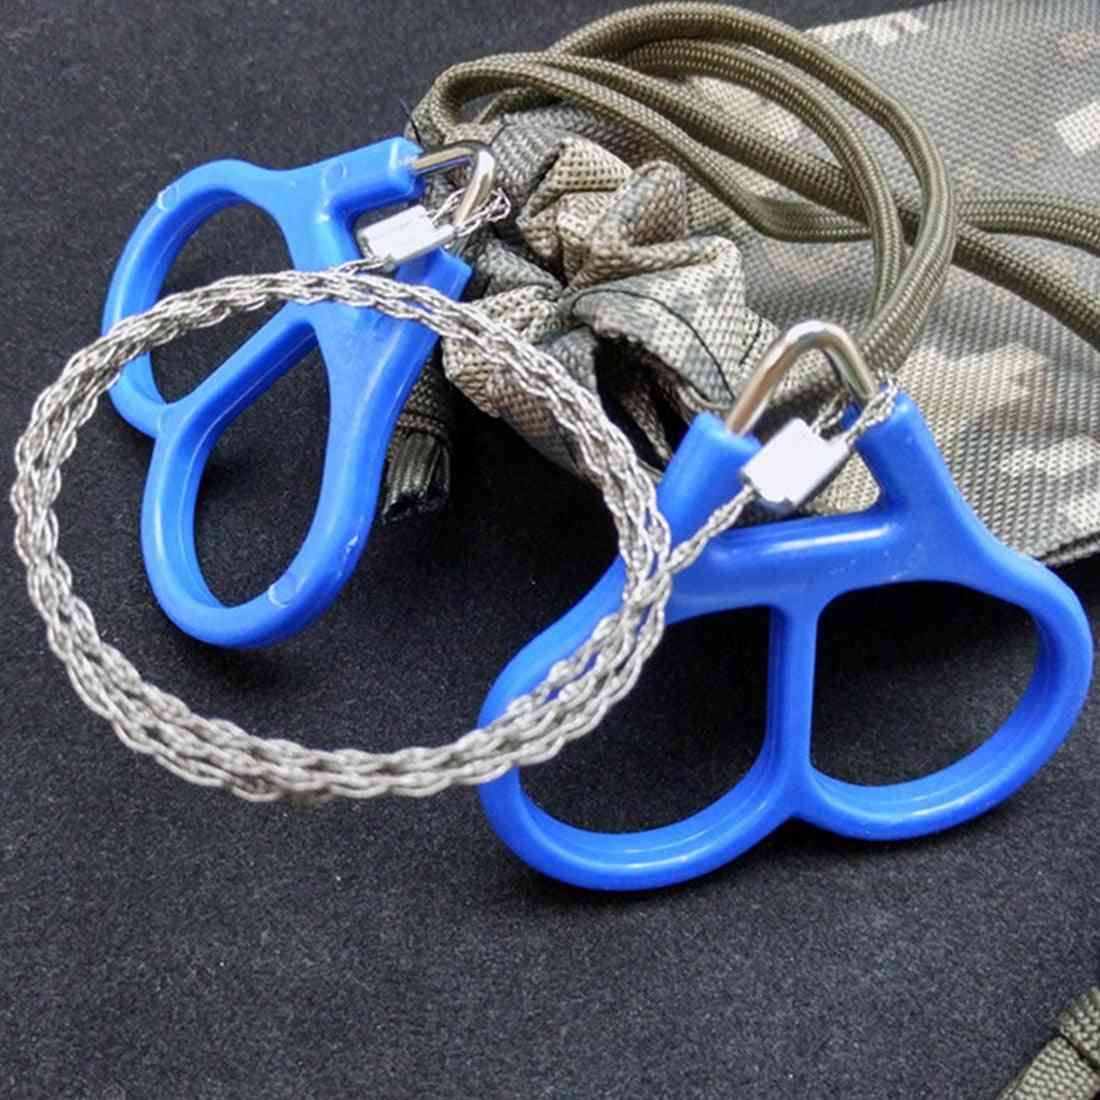 Stainless Steel Wire Saw - Camping Hiking Travel Outdoor Emergency Survive Tool